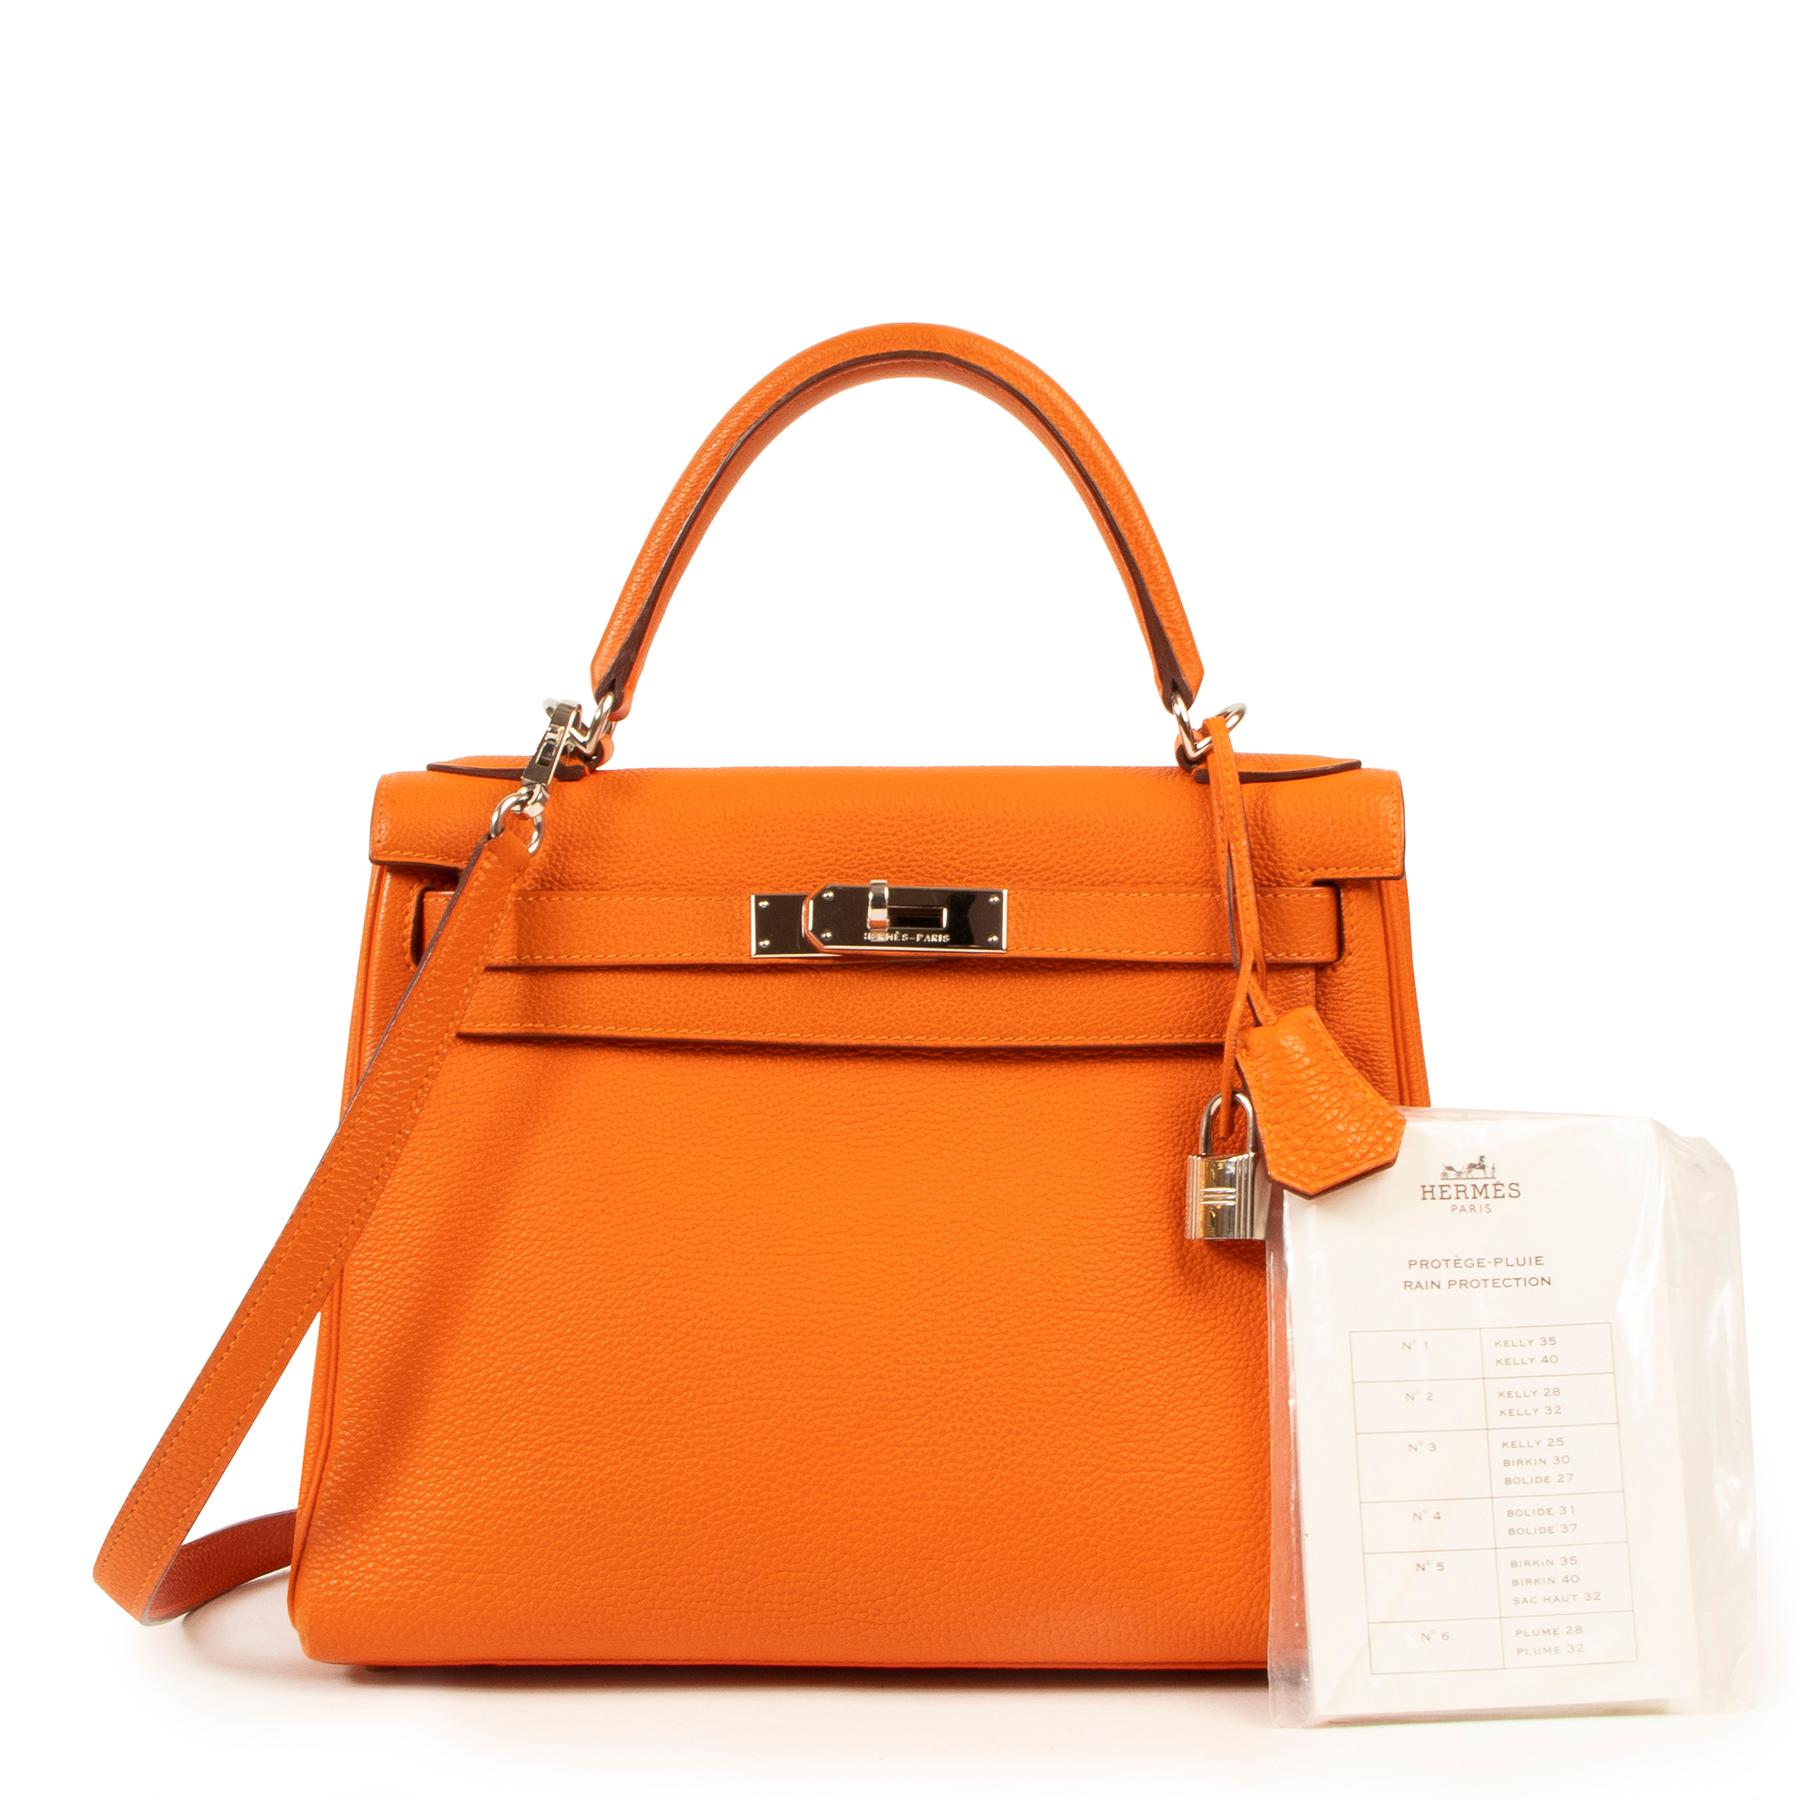 Make heads turn with this stunning Kelly bag.

This beautiful and highly sough-after Hermes Kelly bag is a true icon.

Crafted from gorgeous pebbled togo leather in the iconic Hermes Orange color.

The silver colored hardware makes this bag